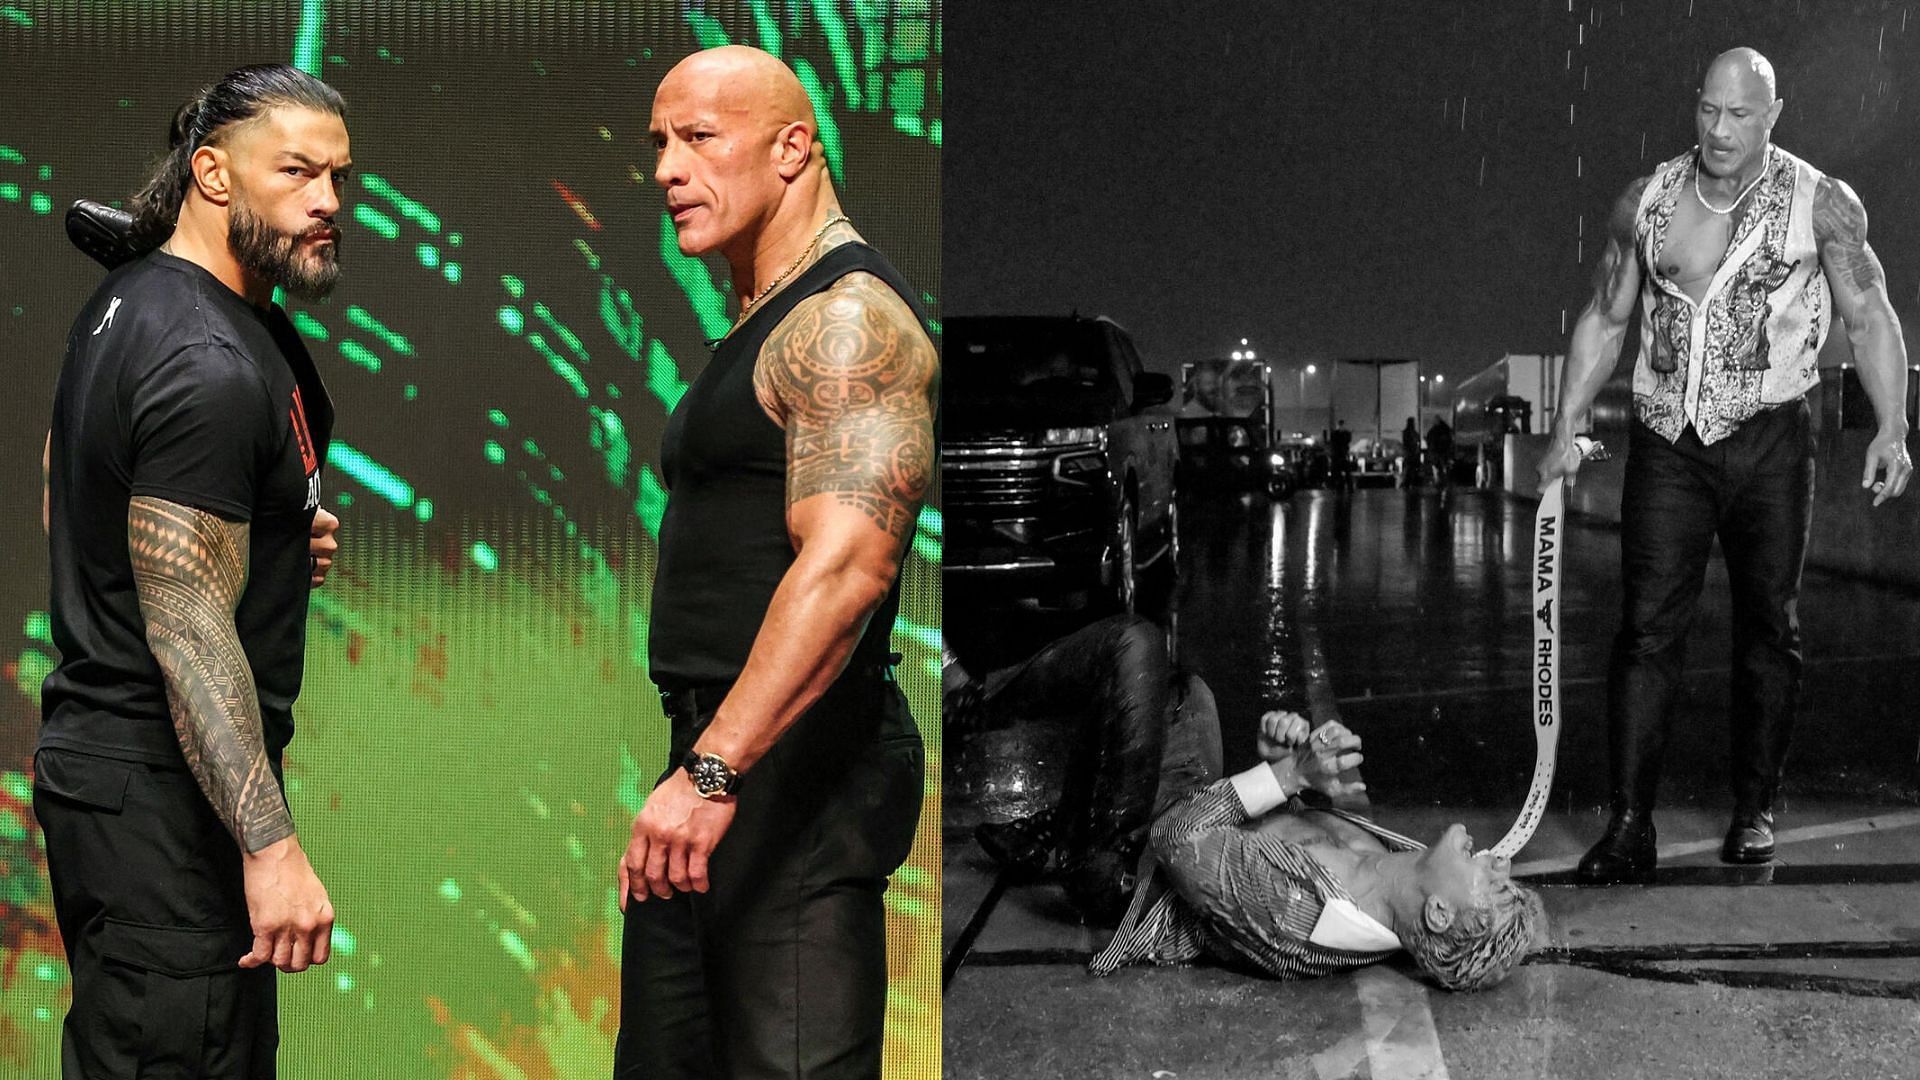 The Rock and Roman Reigns will team up on Night 1 of WrestleMania